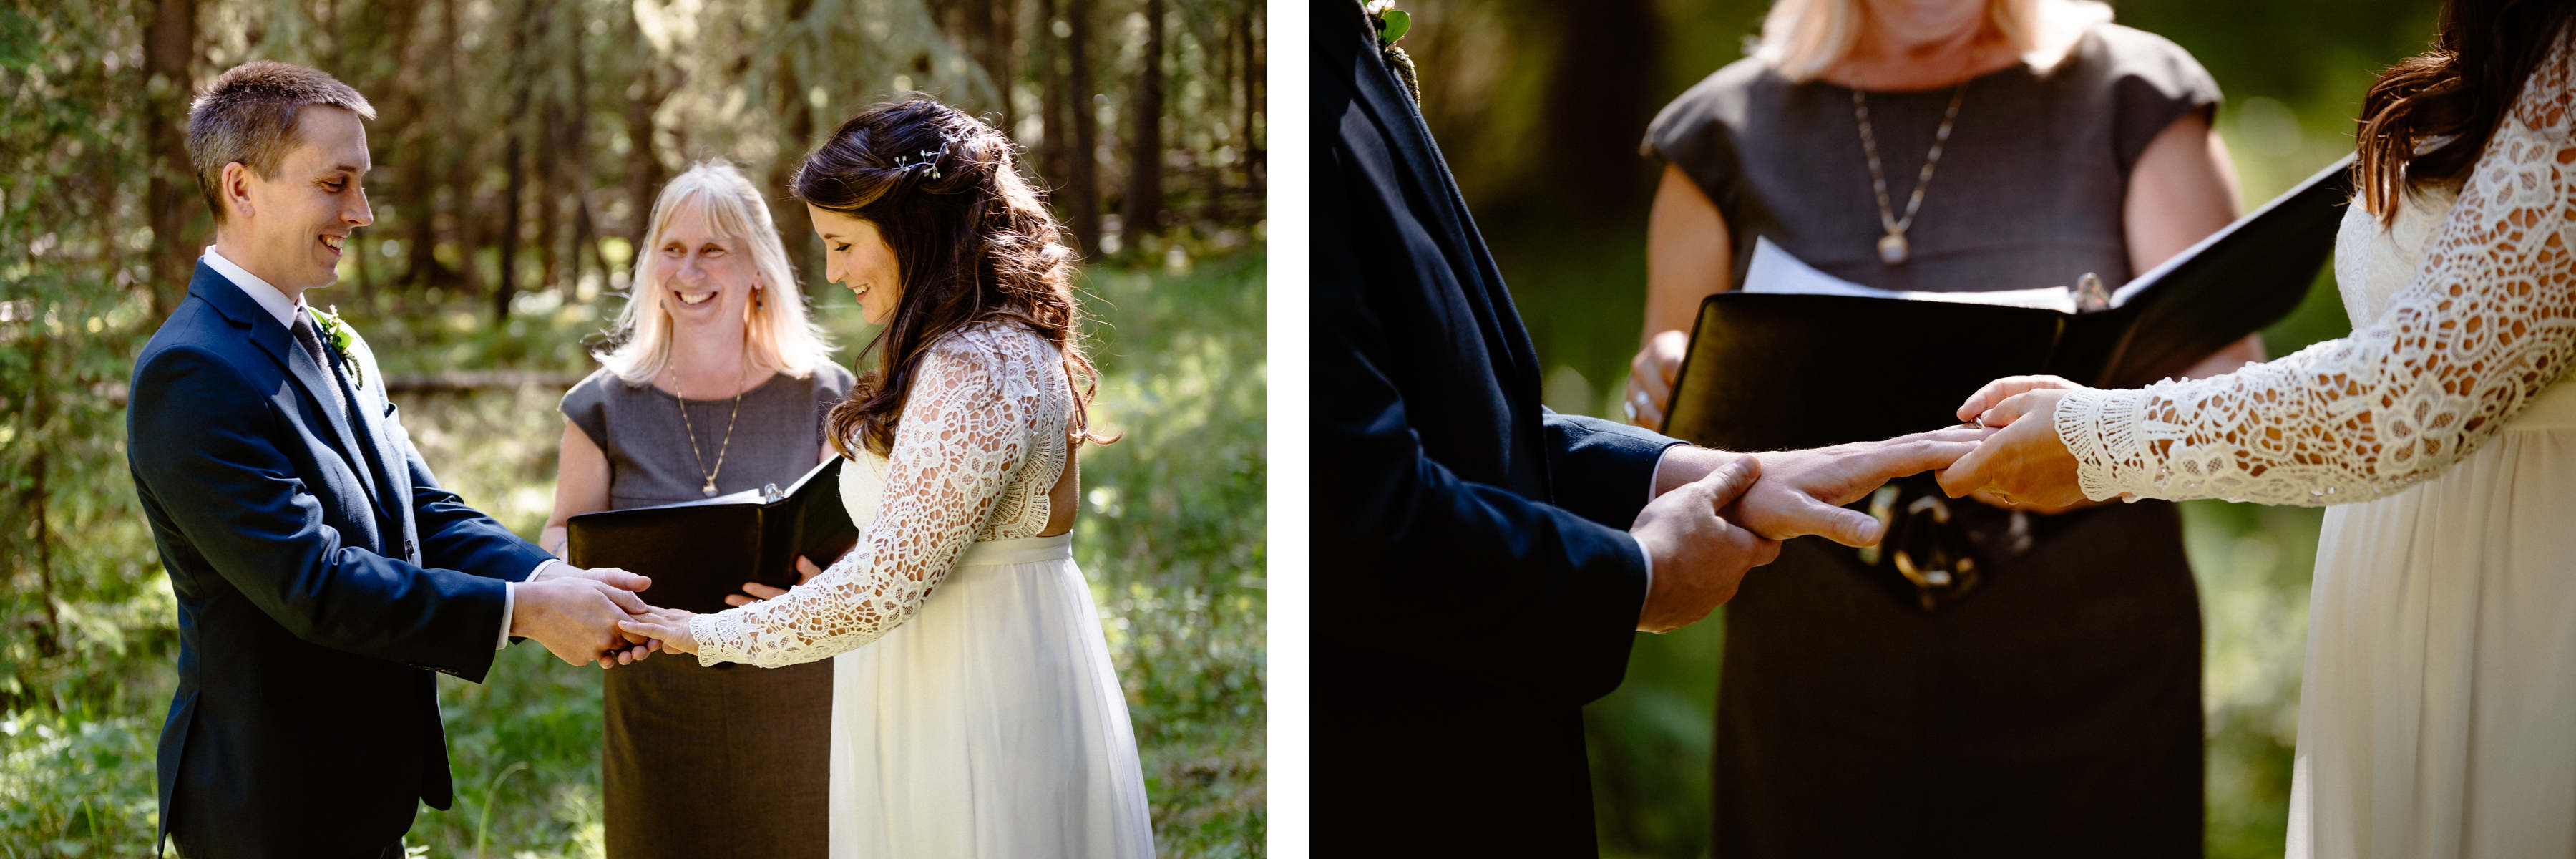 Vow Renewal Photography in Banff - Image 9